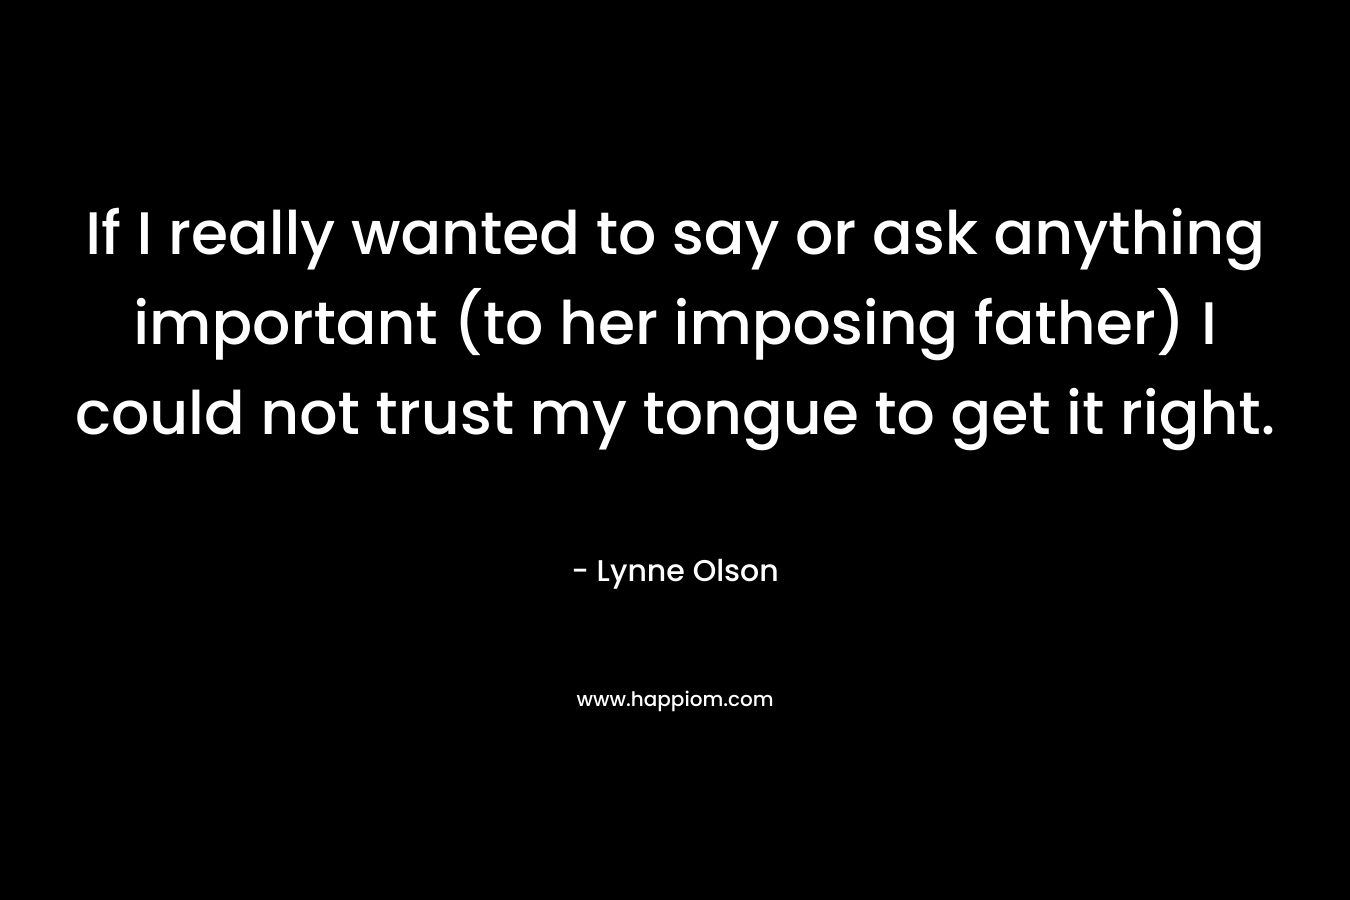 If I really wanted to say or ask anything important (to her imposing father) I could not trust my tongue to get it right. – Lynne Olson